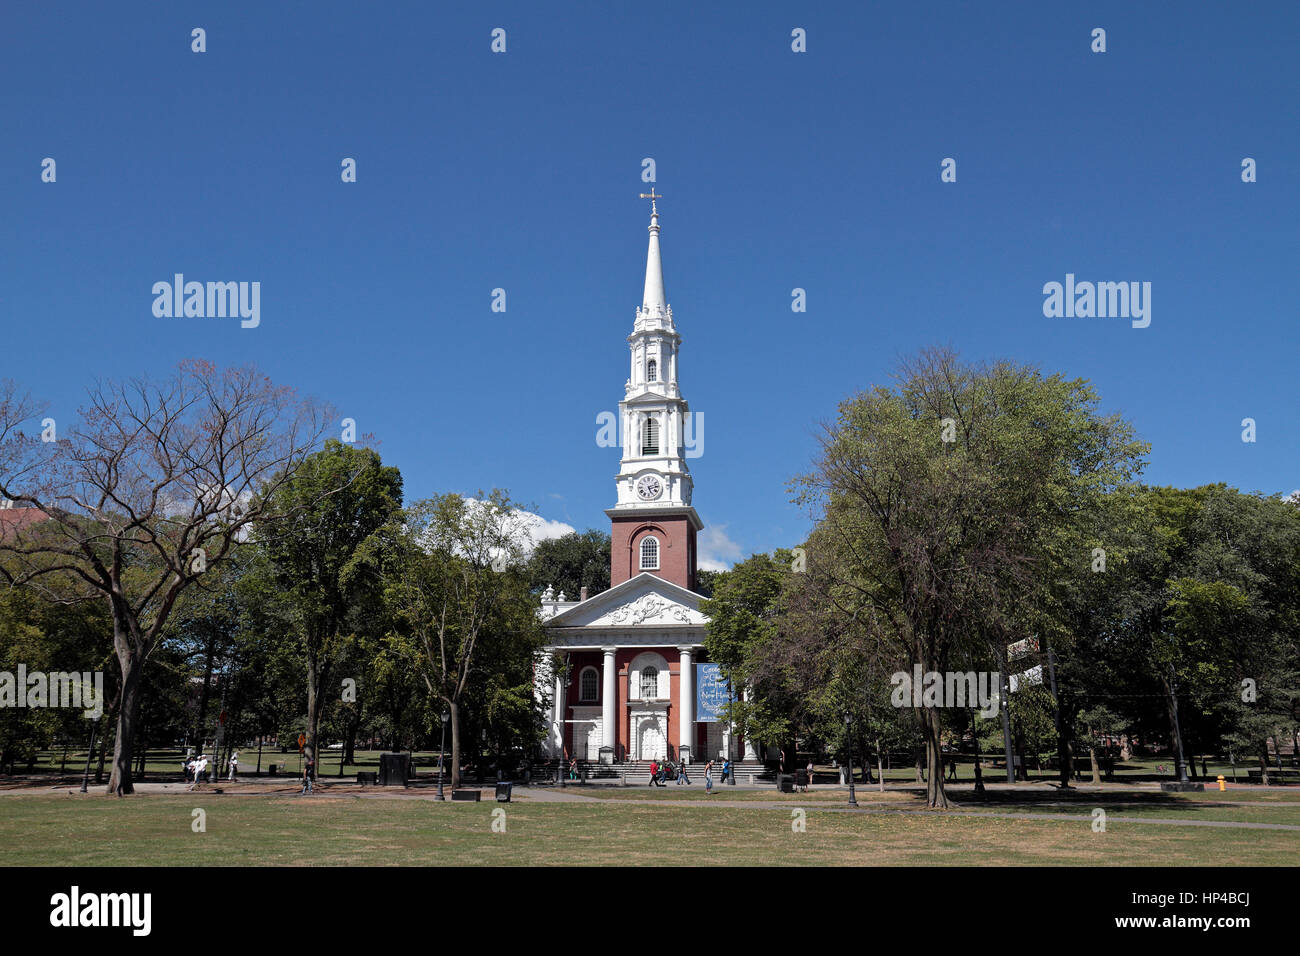 The Center Church on the Green, New Haven Green, New Haven, Connecticut, United States. Stock Photo